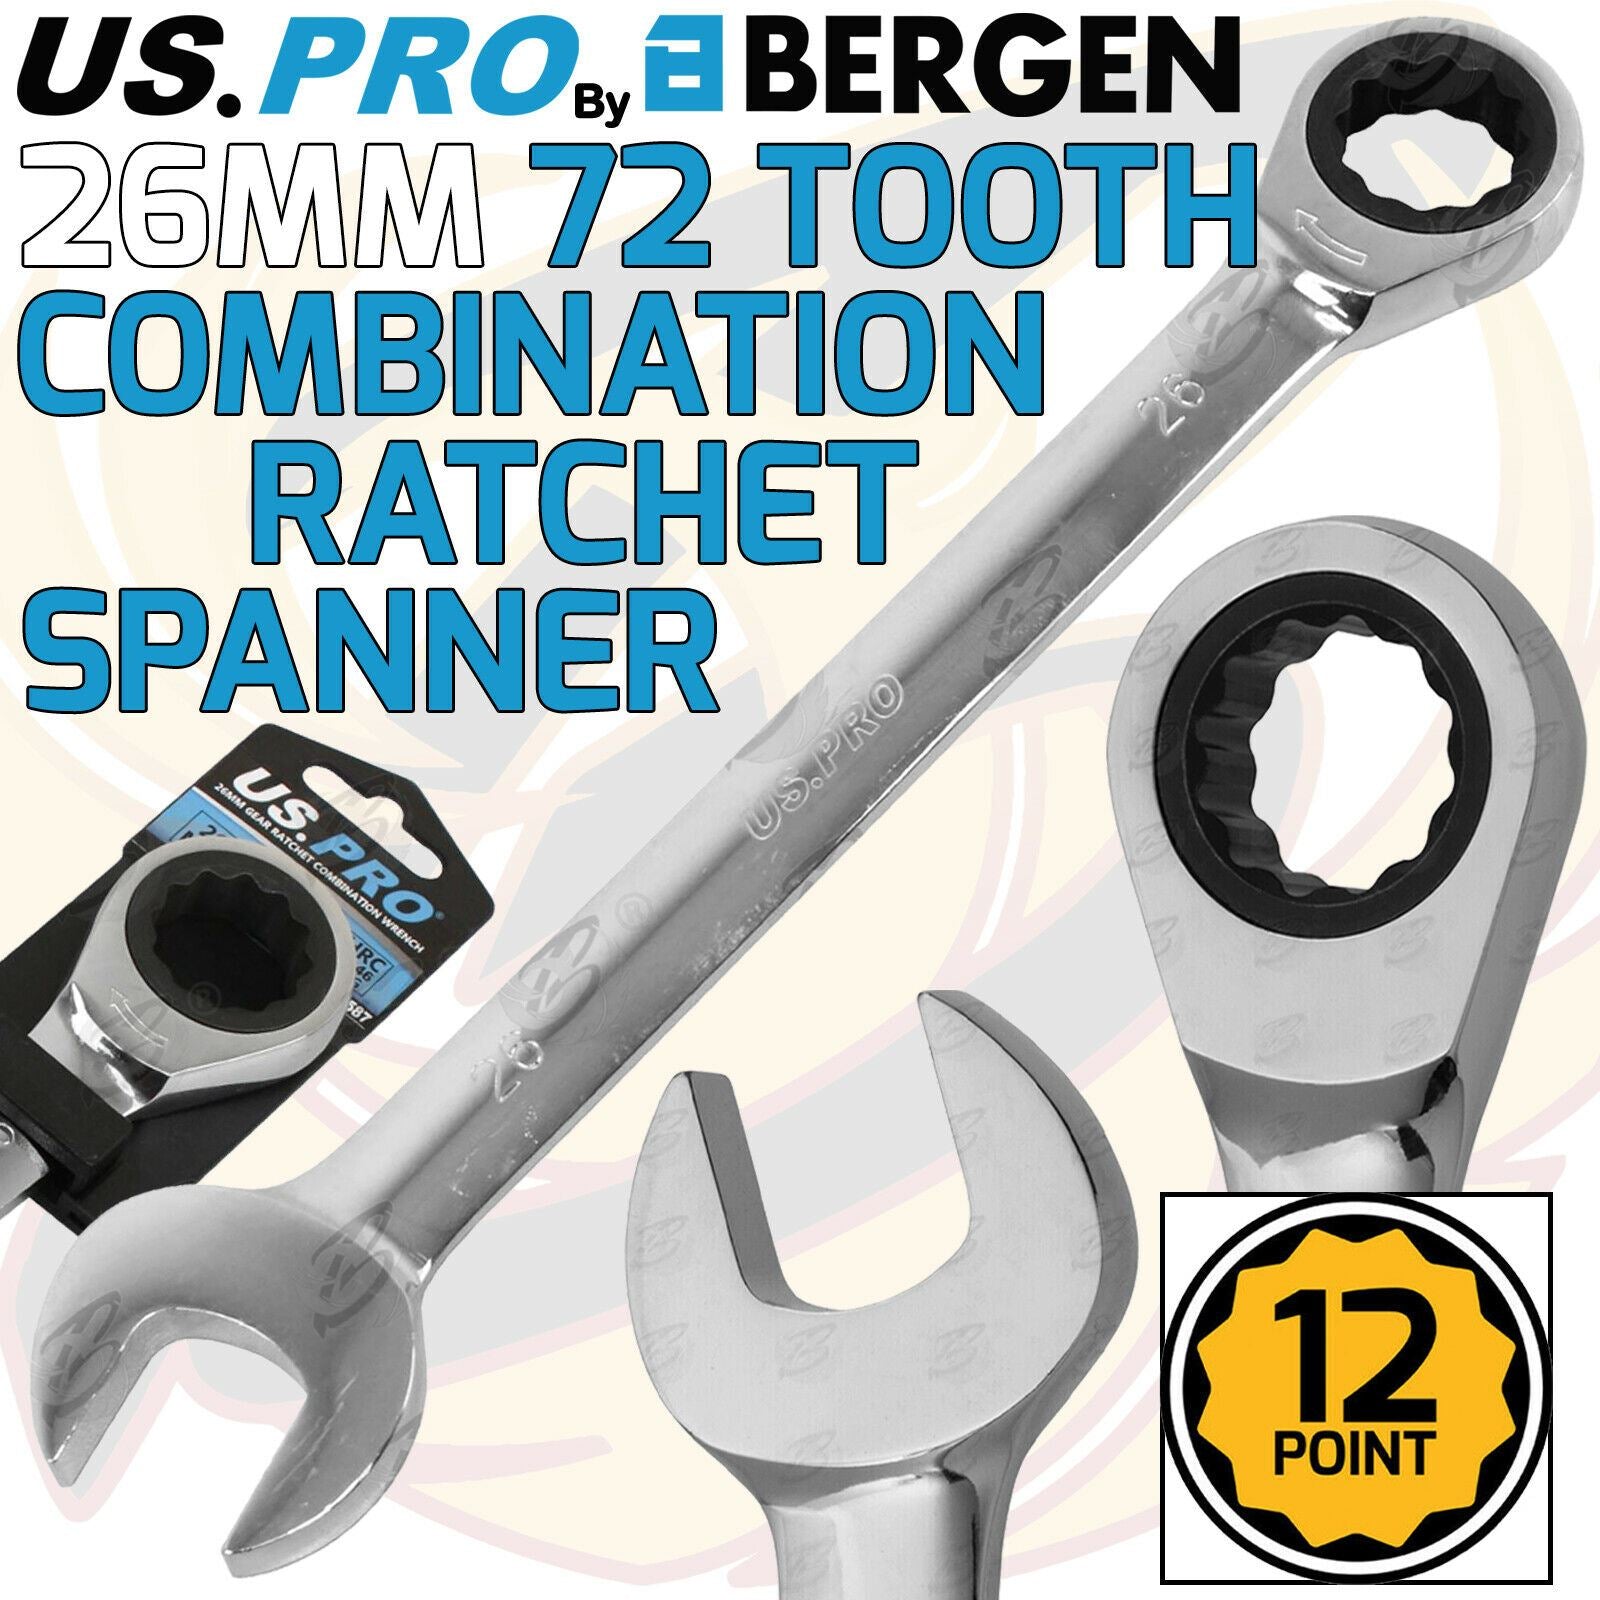 US PRO 26MM 72 TOOTH RATCHET SPANNER